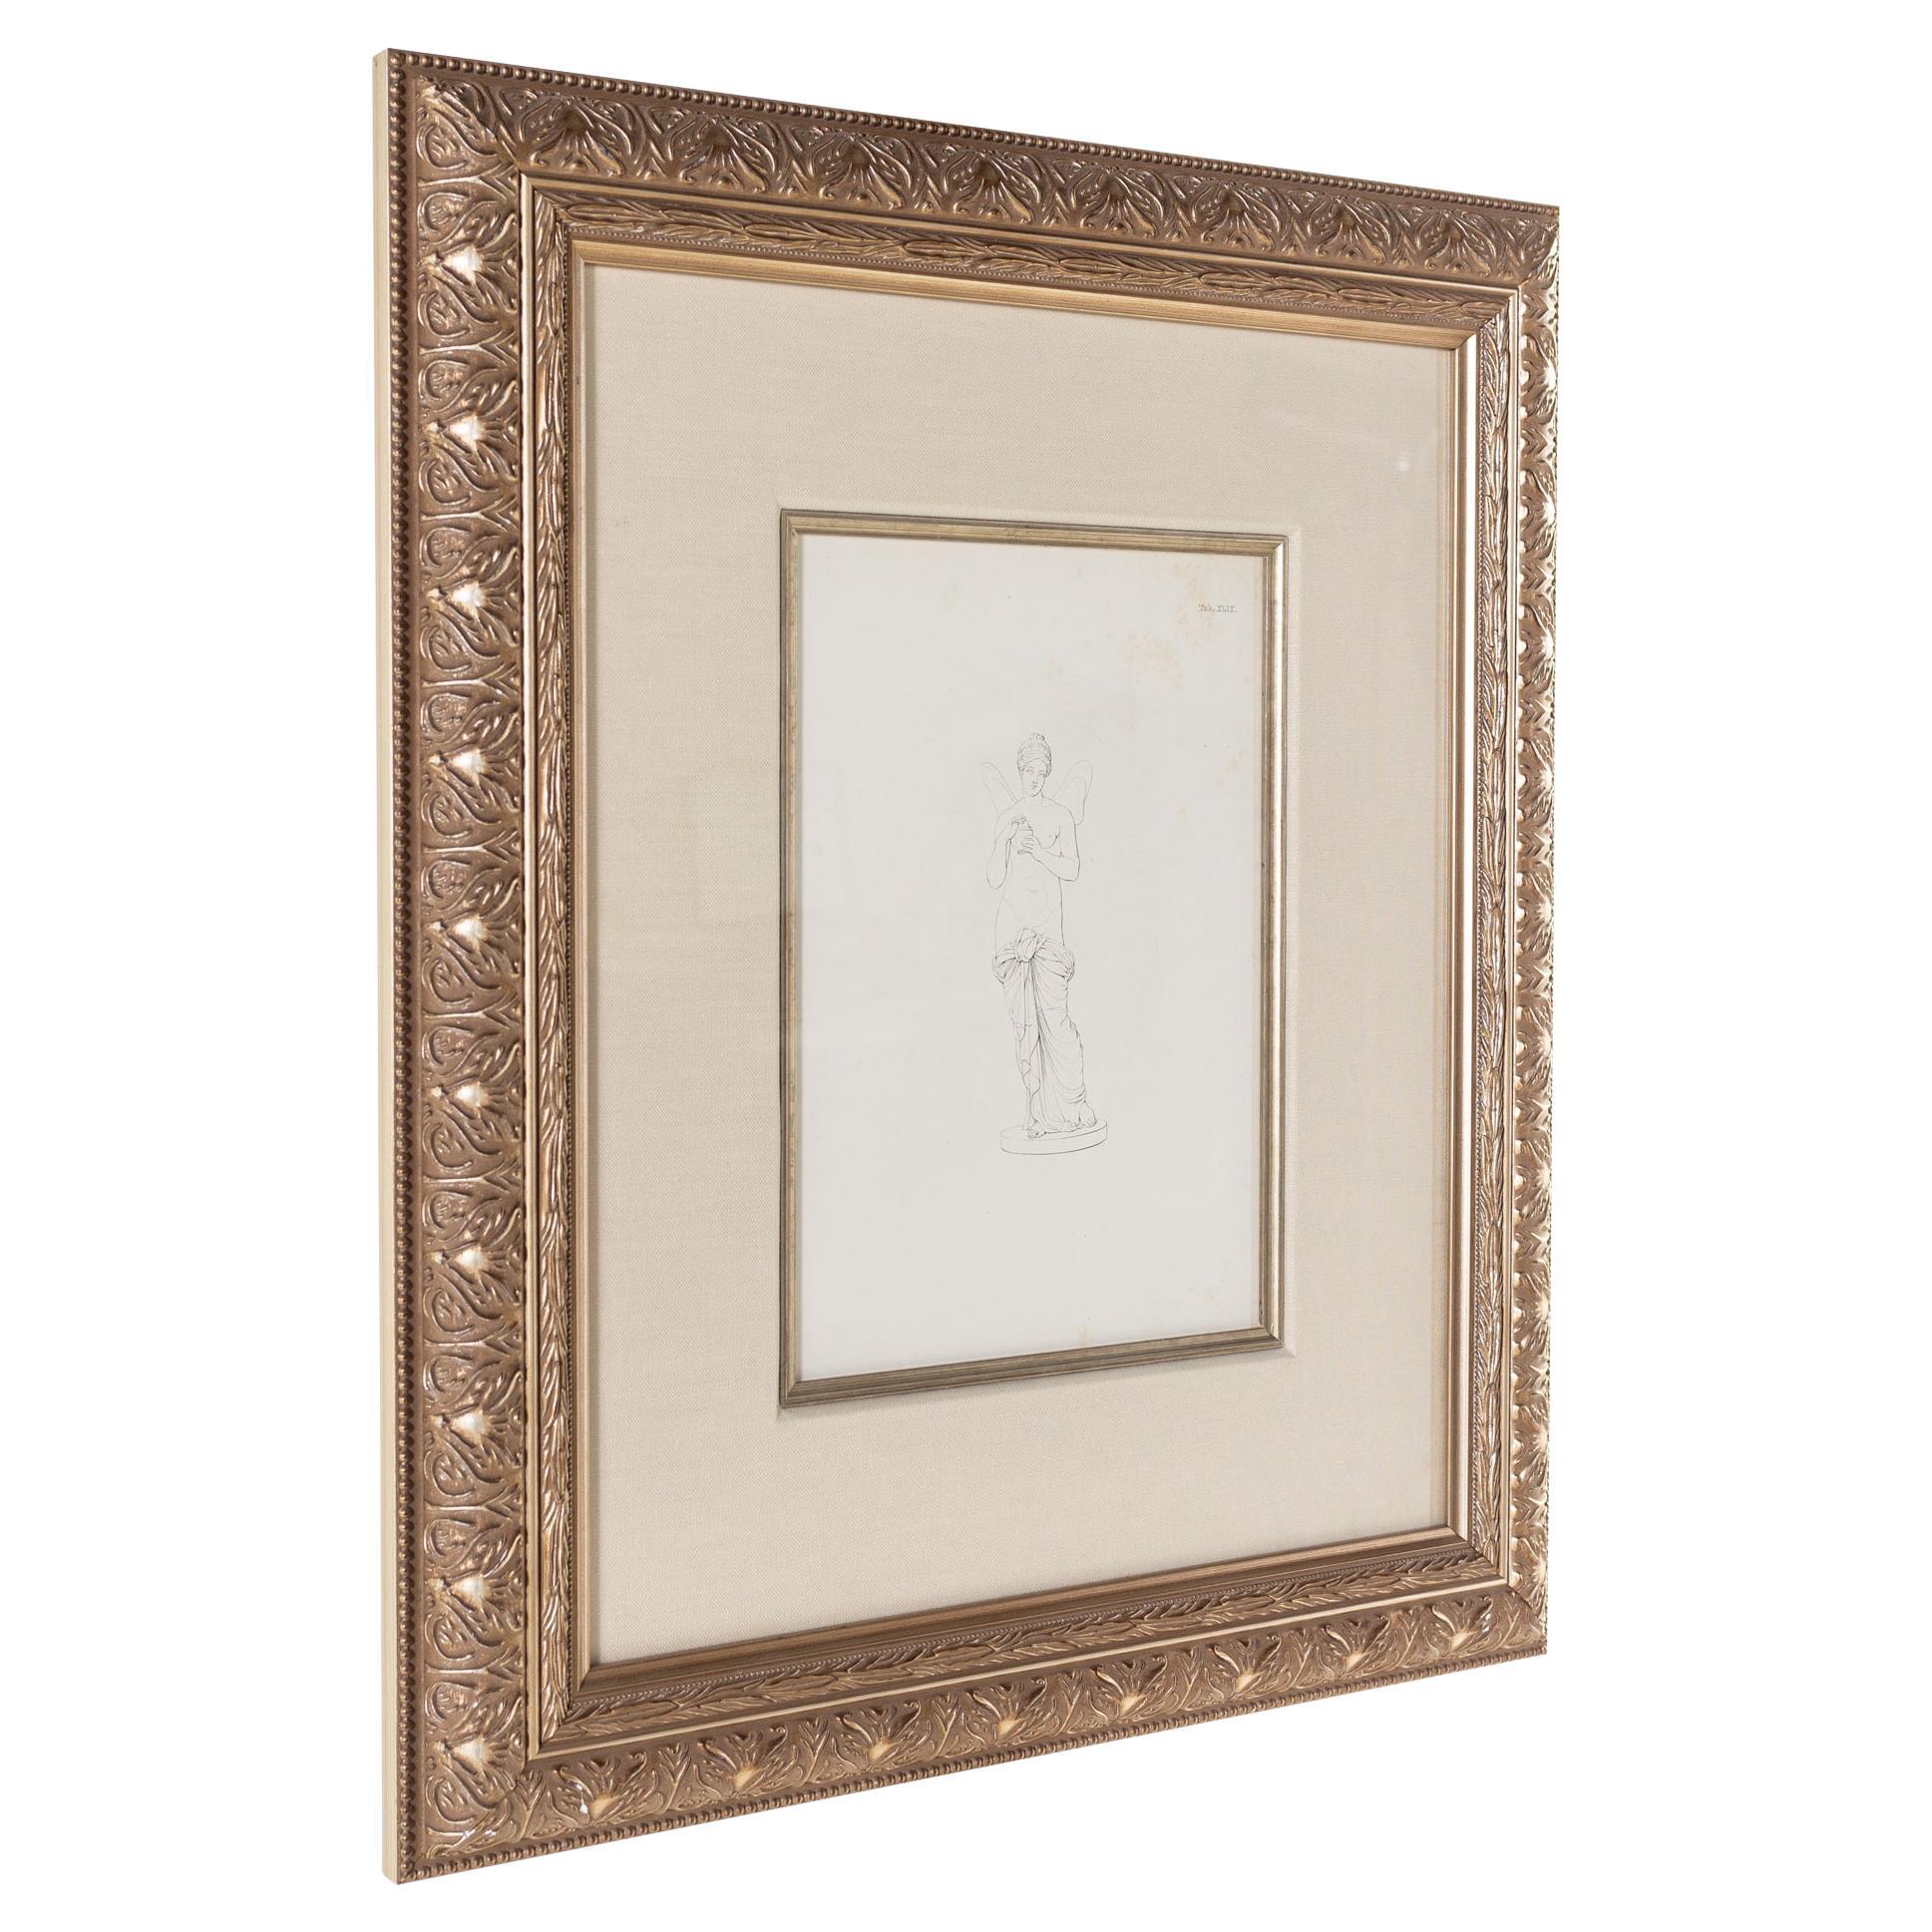 Pencil Drawing of Women Gold Framed For Sale